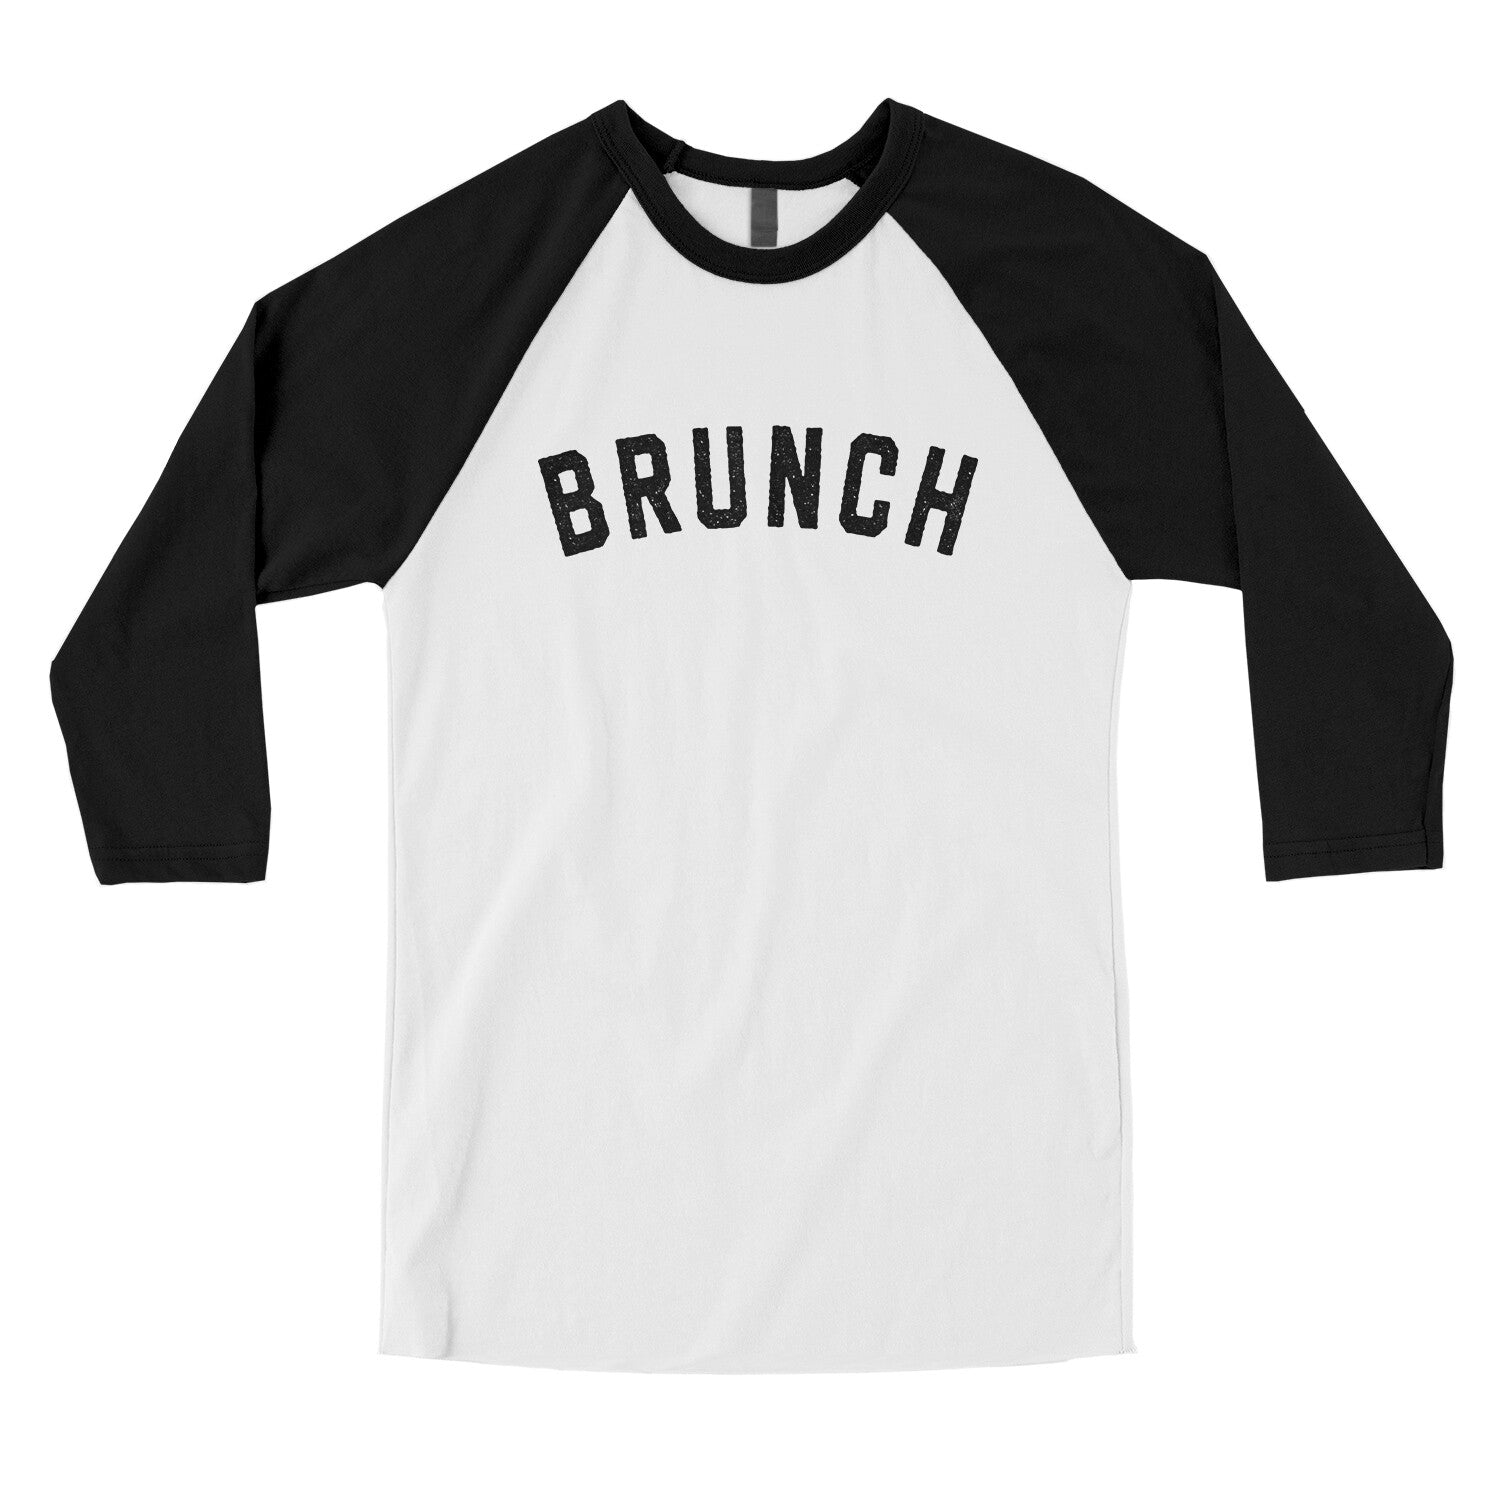 Brunch in White with Black Color